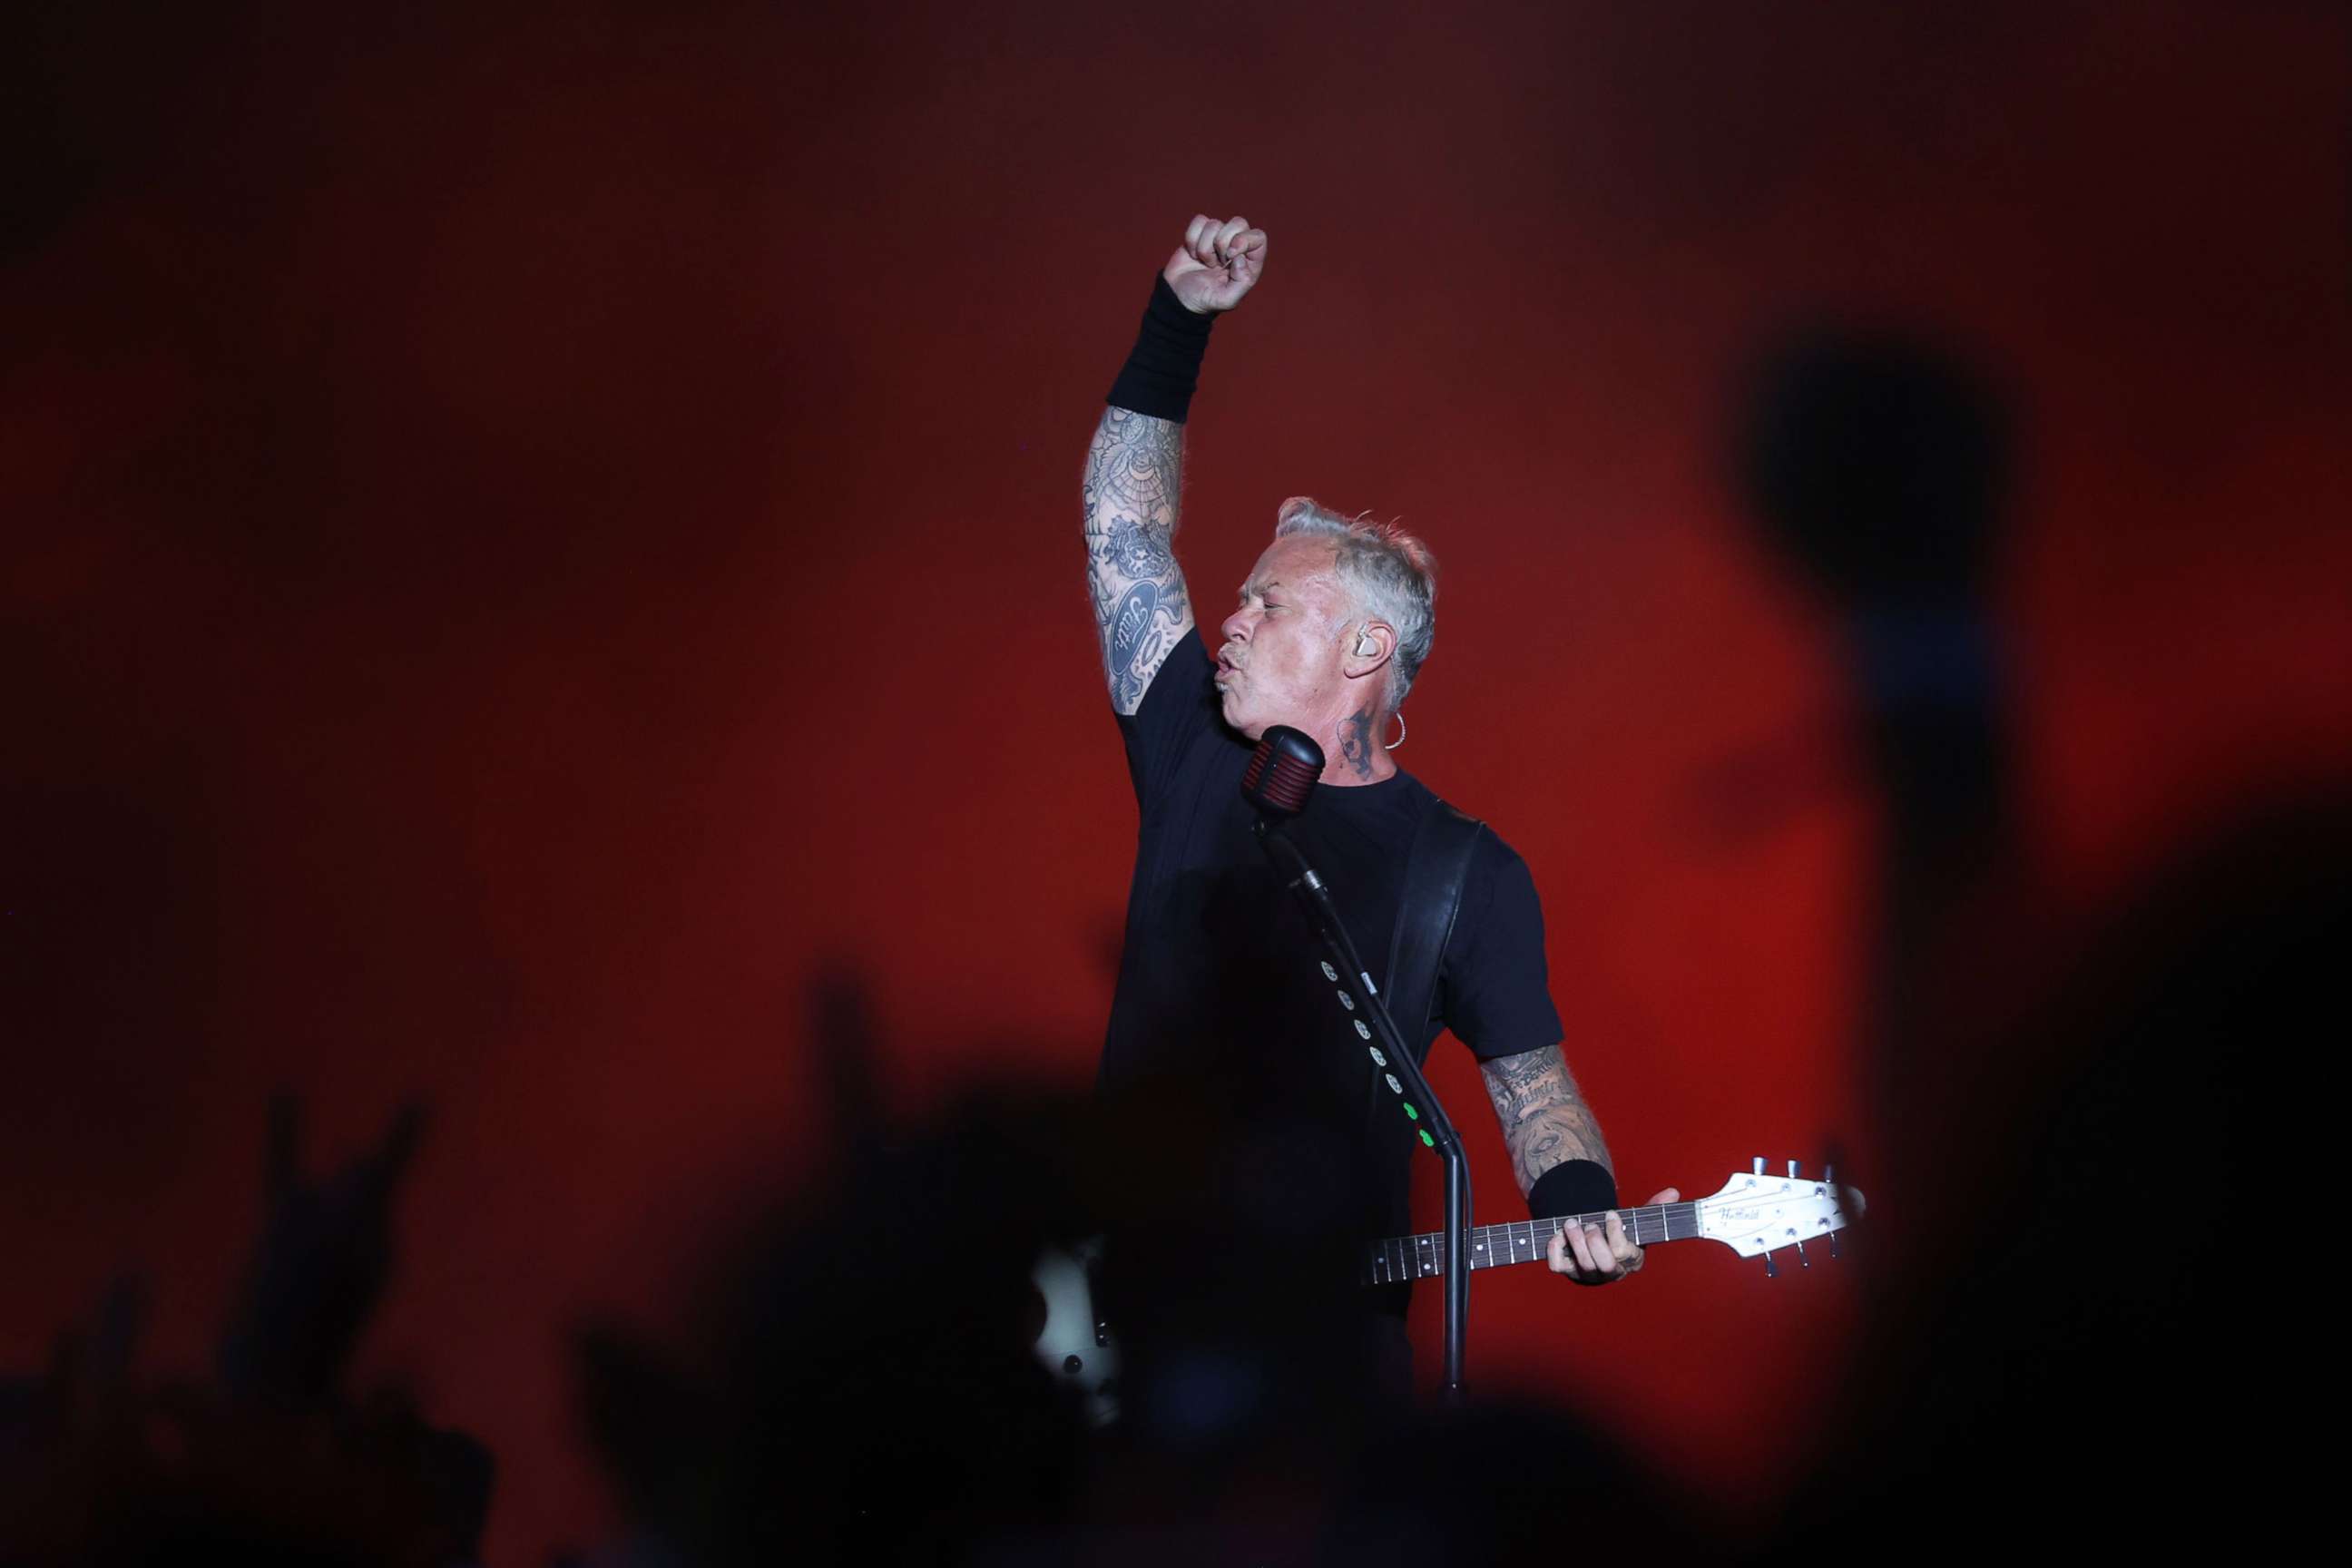 PHOTO: Guitarist and singer of US rock band Metallica, James Alan Hetfield performs during a concert at the 2022 MadCool Festival in Madrid, July 6, 2022. 